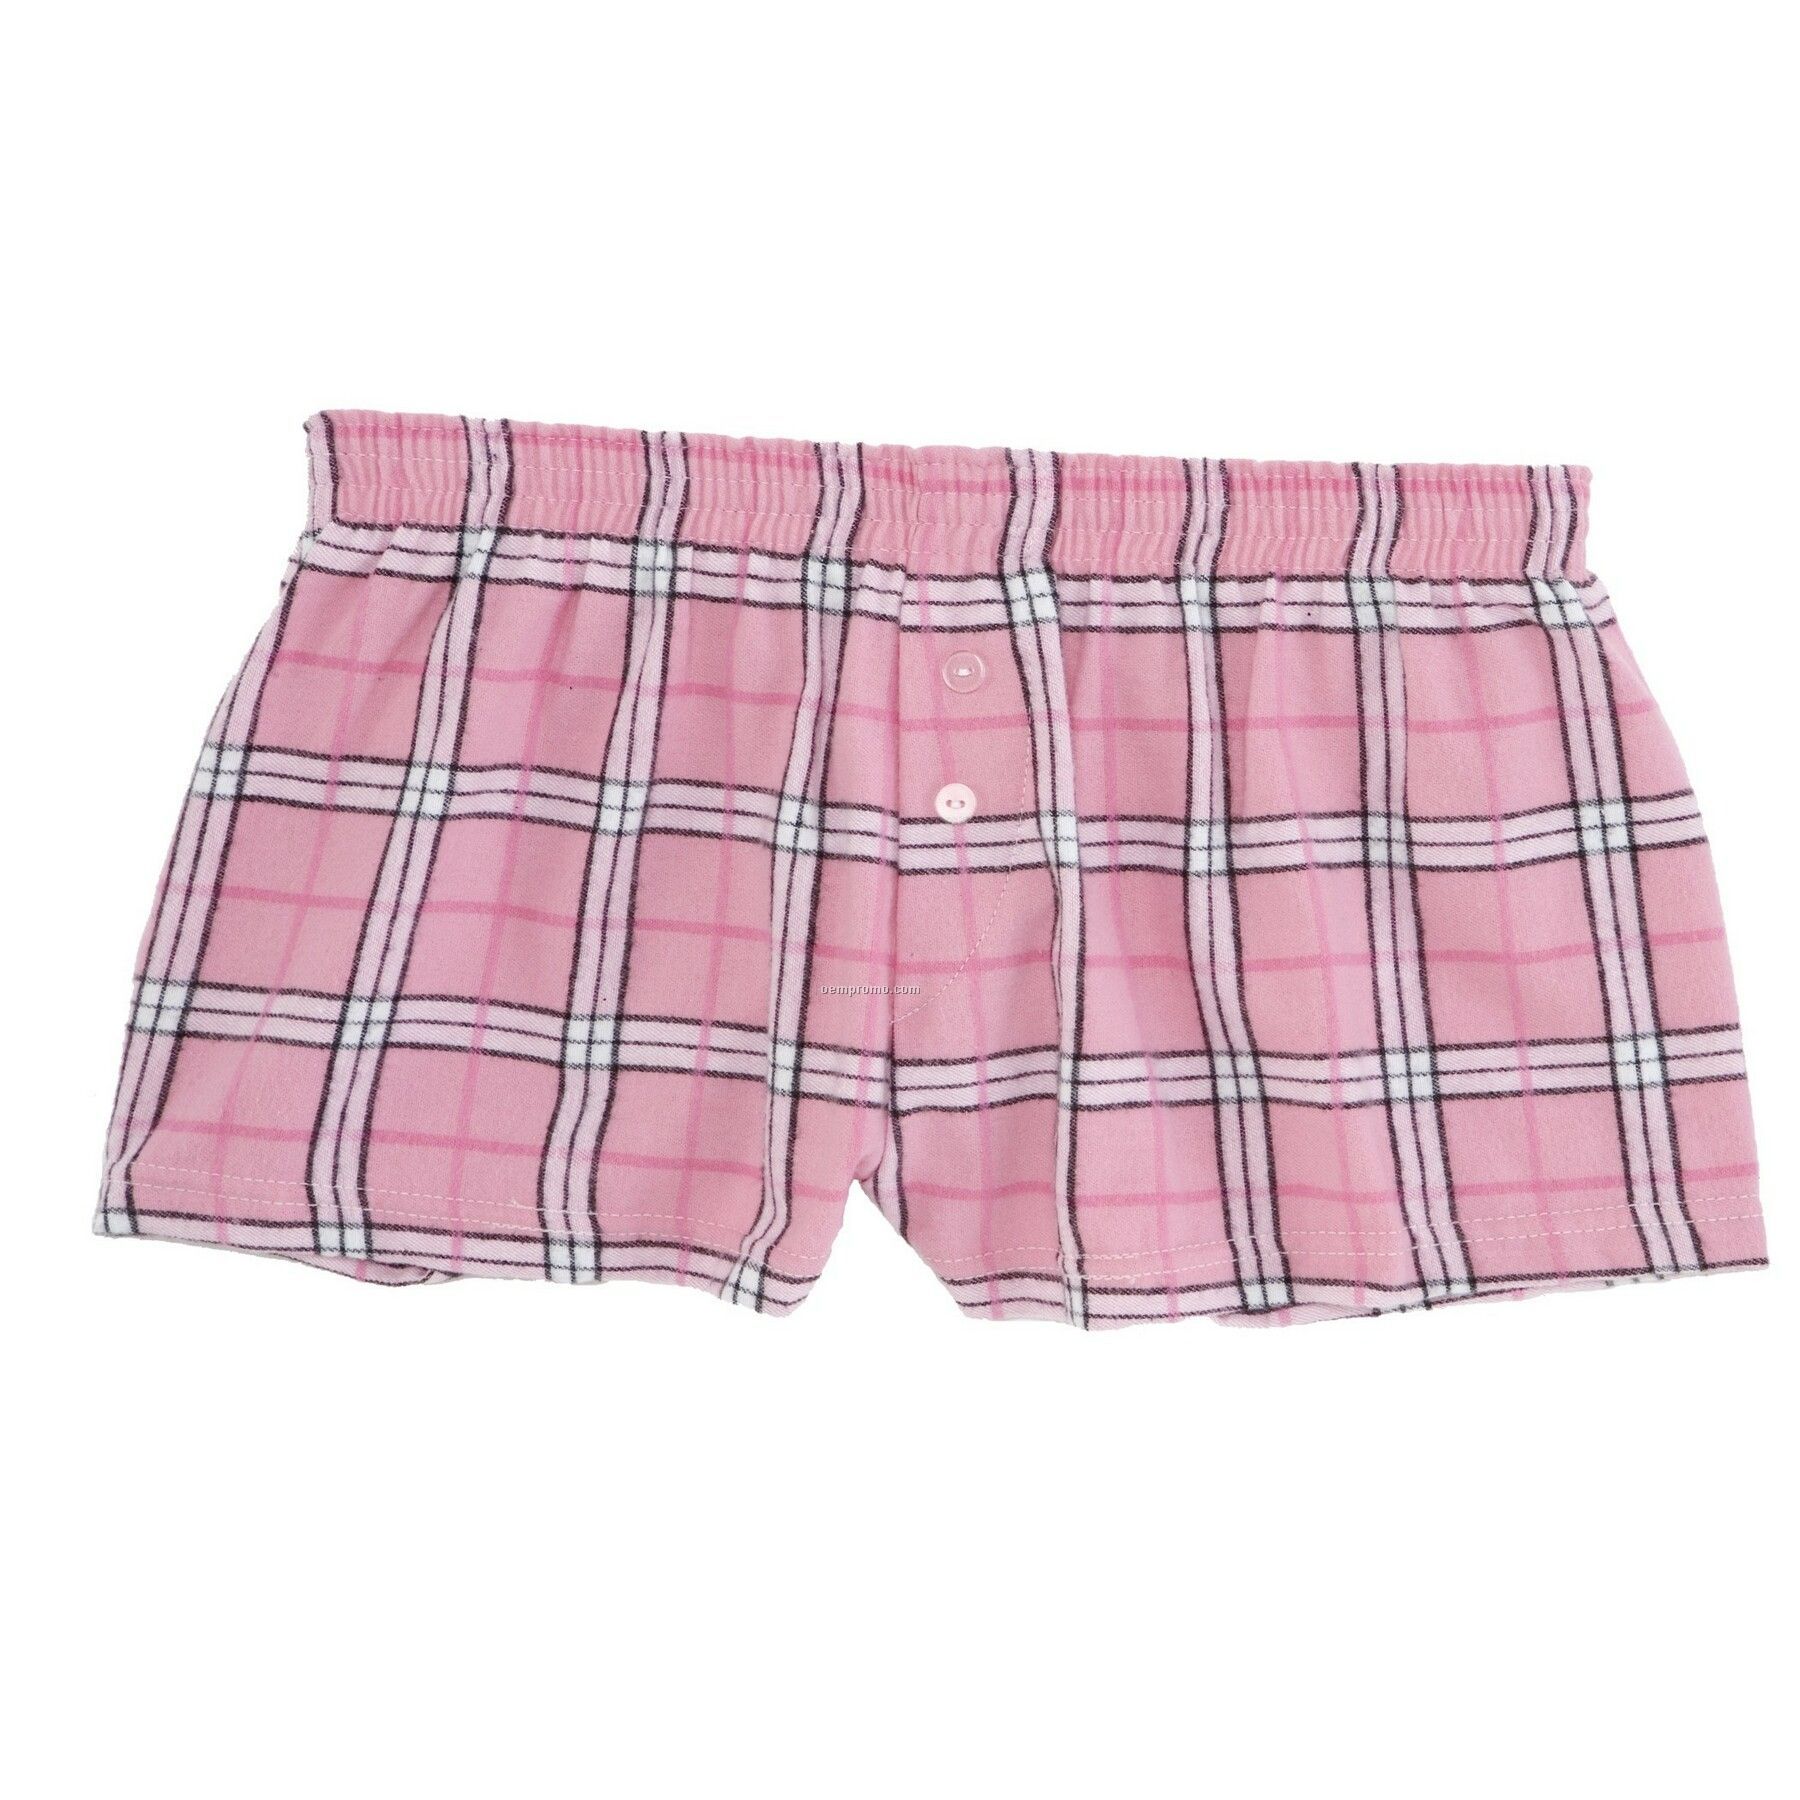 Youth Pink/Black Flannel Bitty Boxer Short W/ False Fly